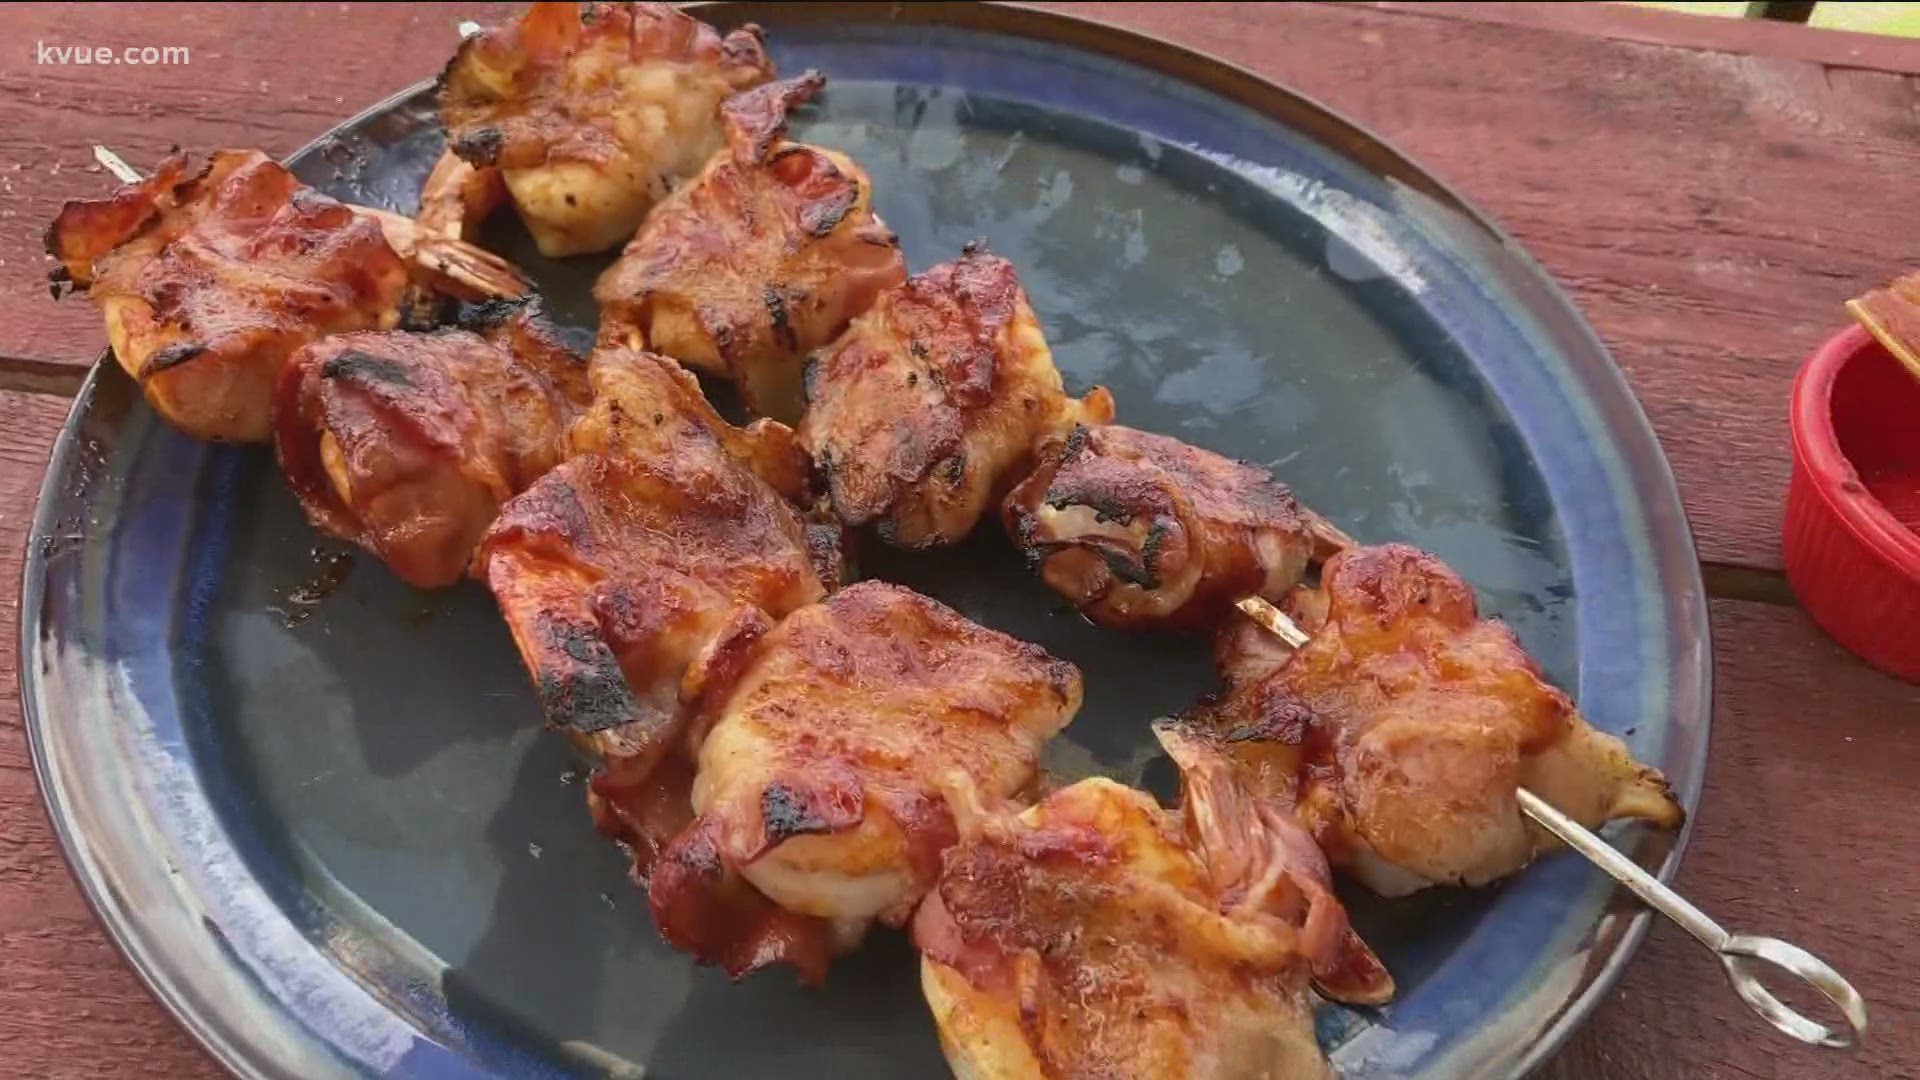 Today we're making shrimp. But you know what makes grilled shrimp even better? Bacon!